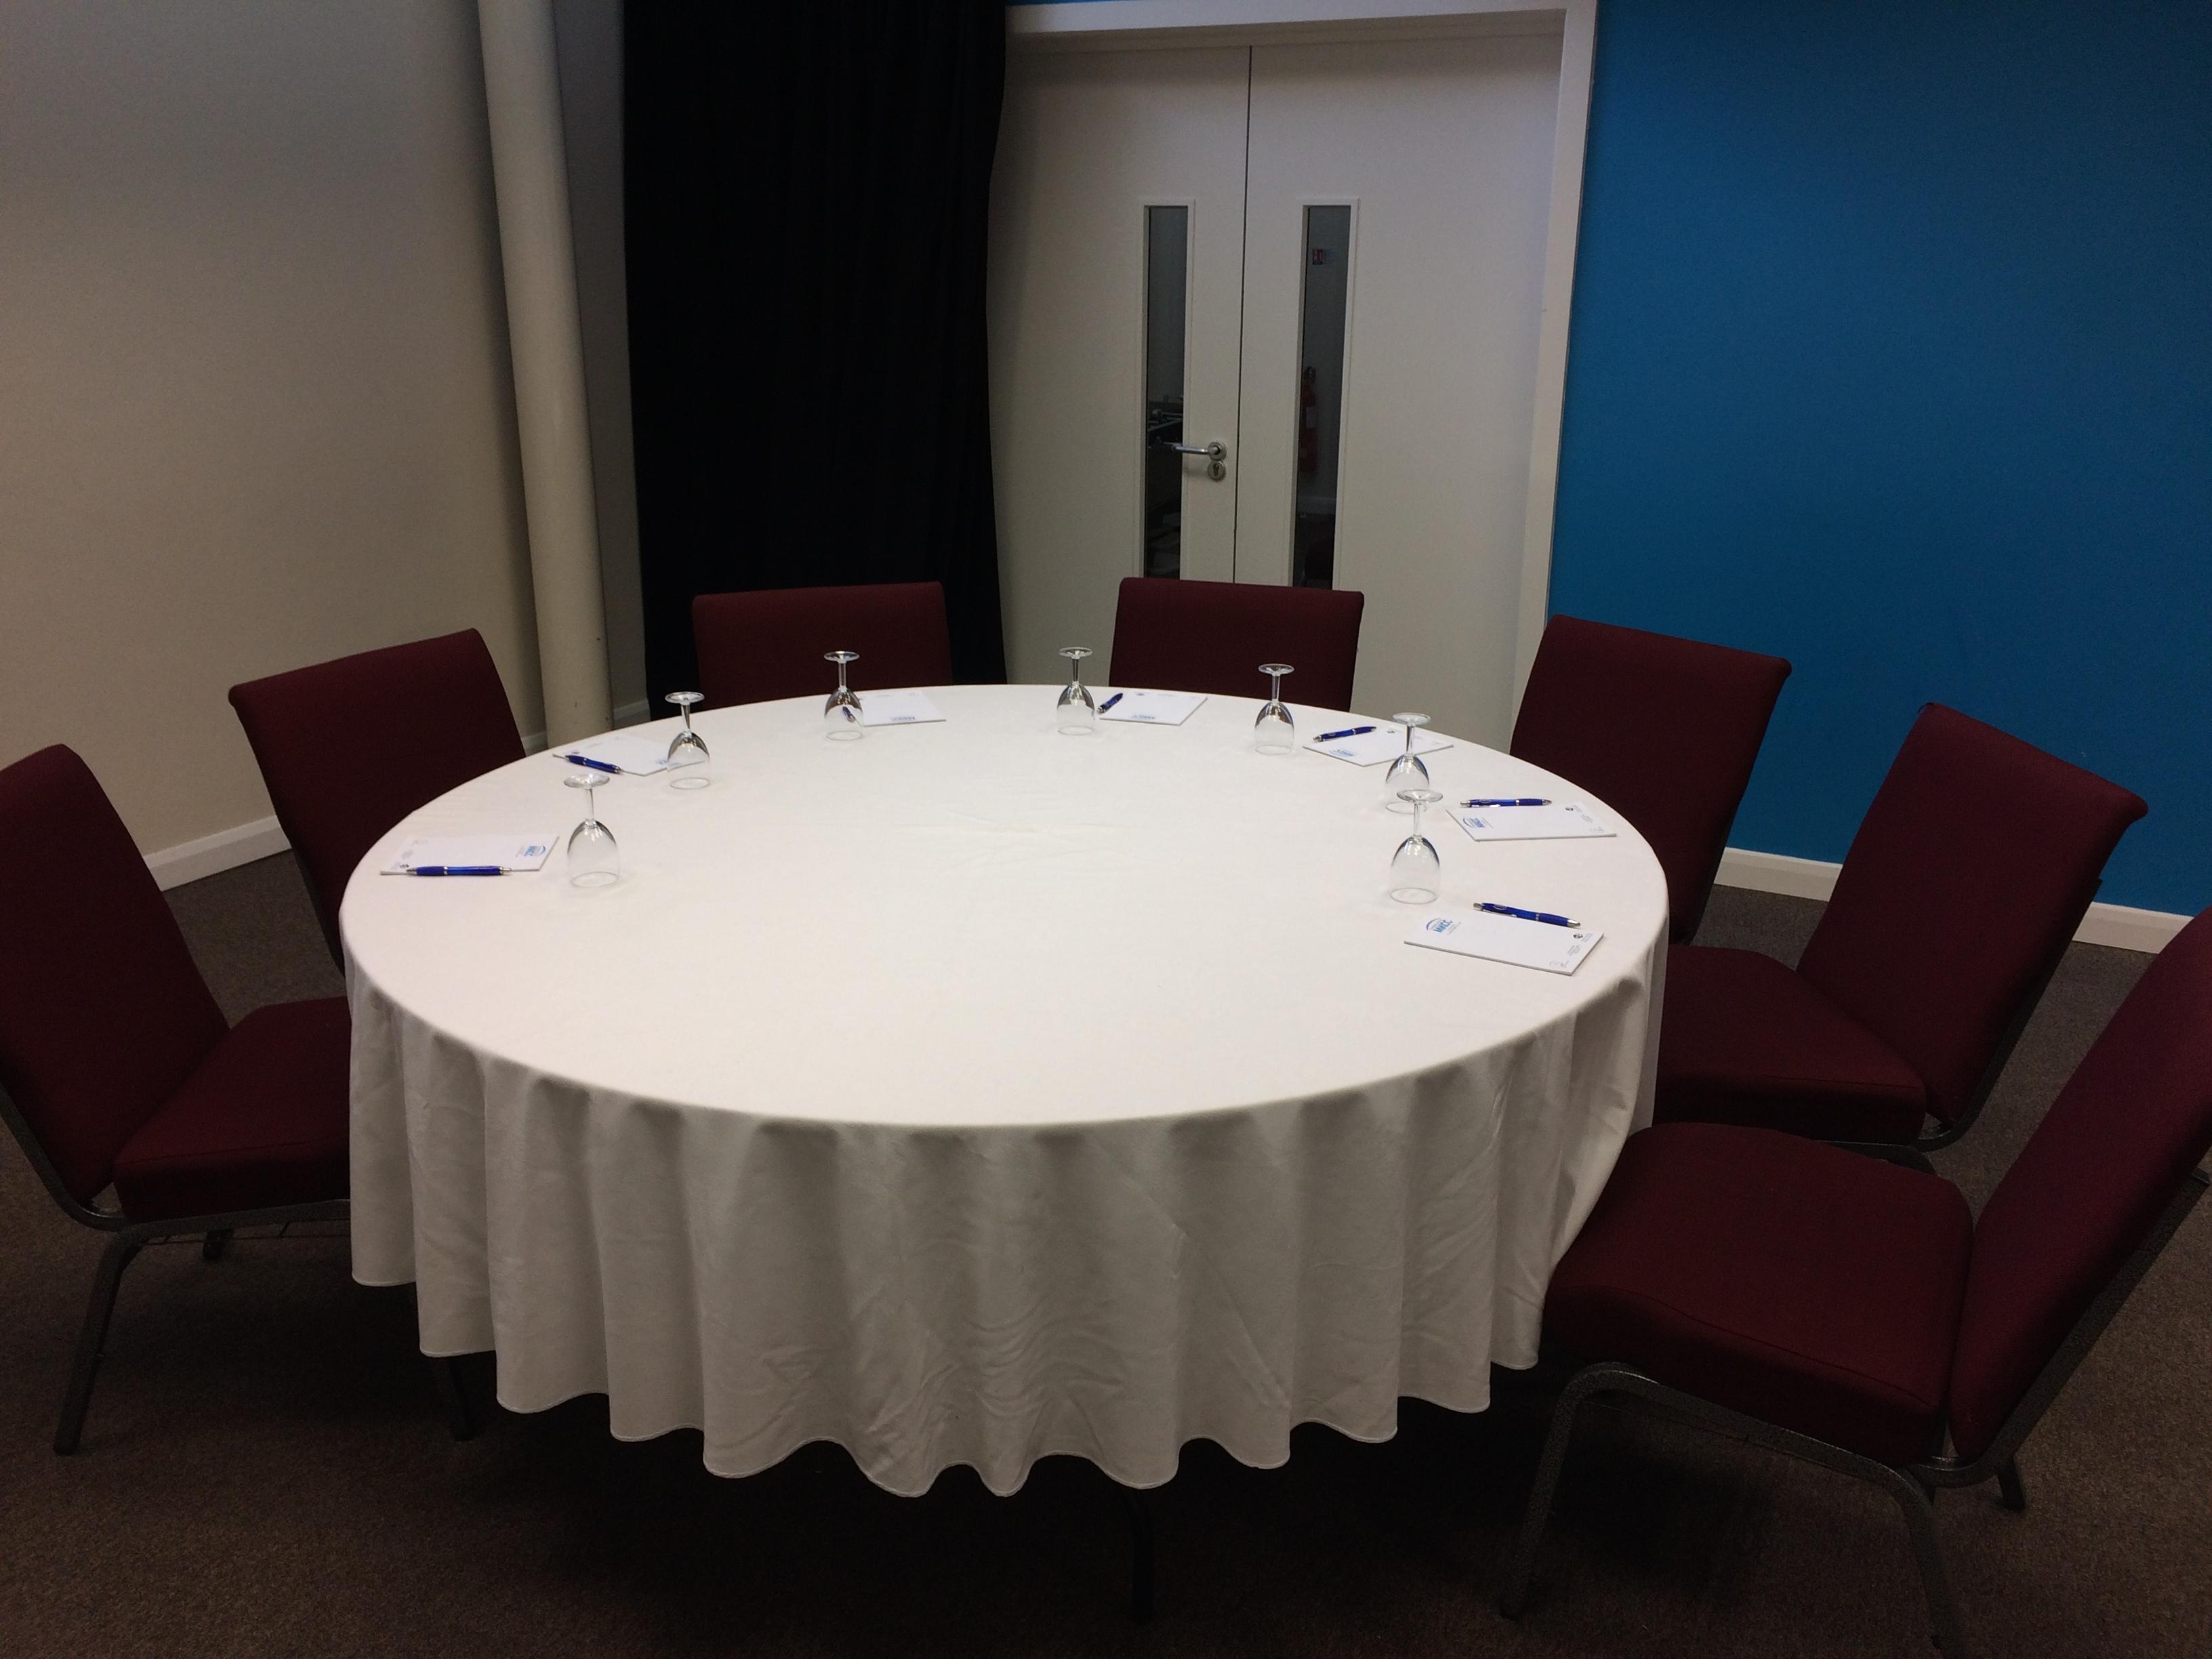 Discovery Suite 2, MK Conferencing photo #3